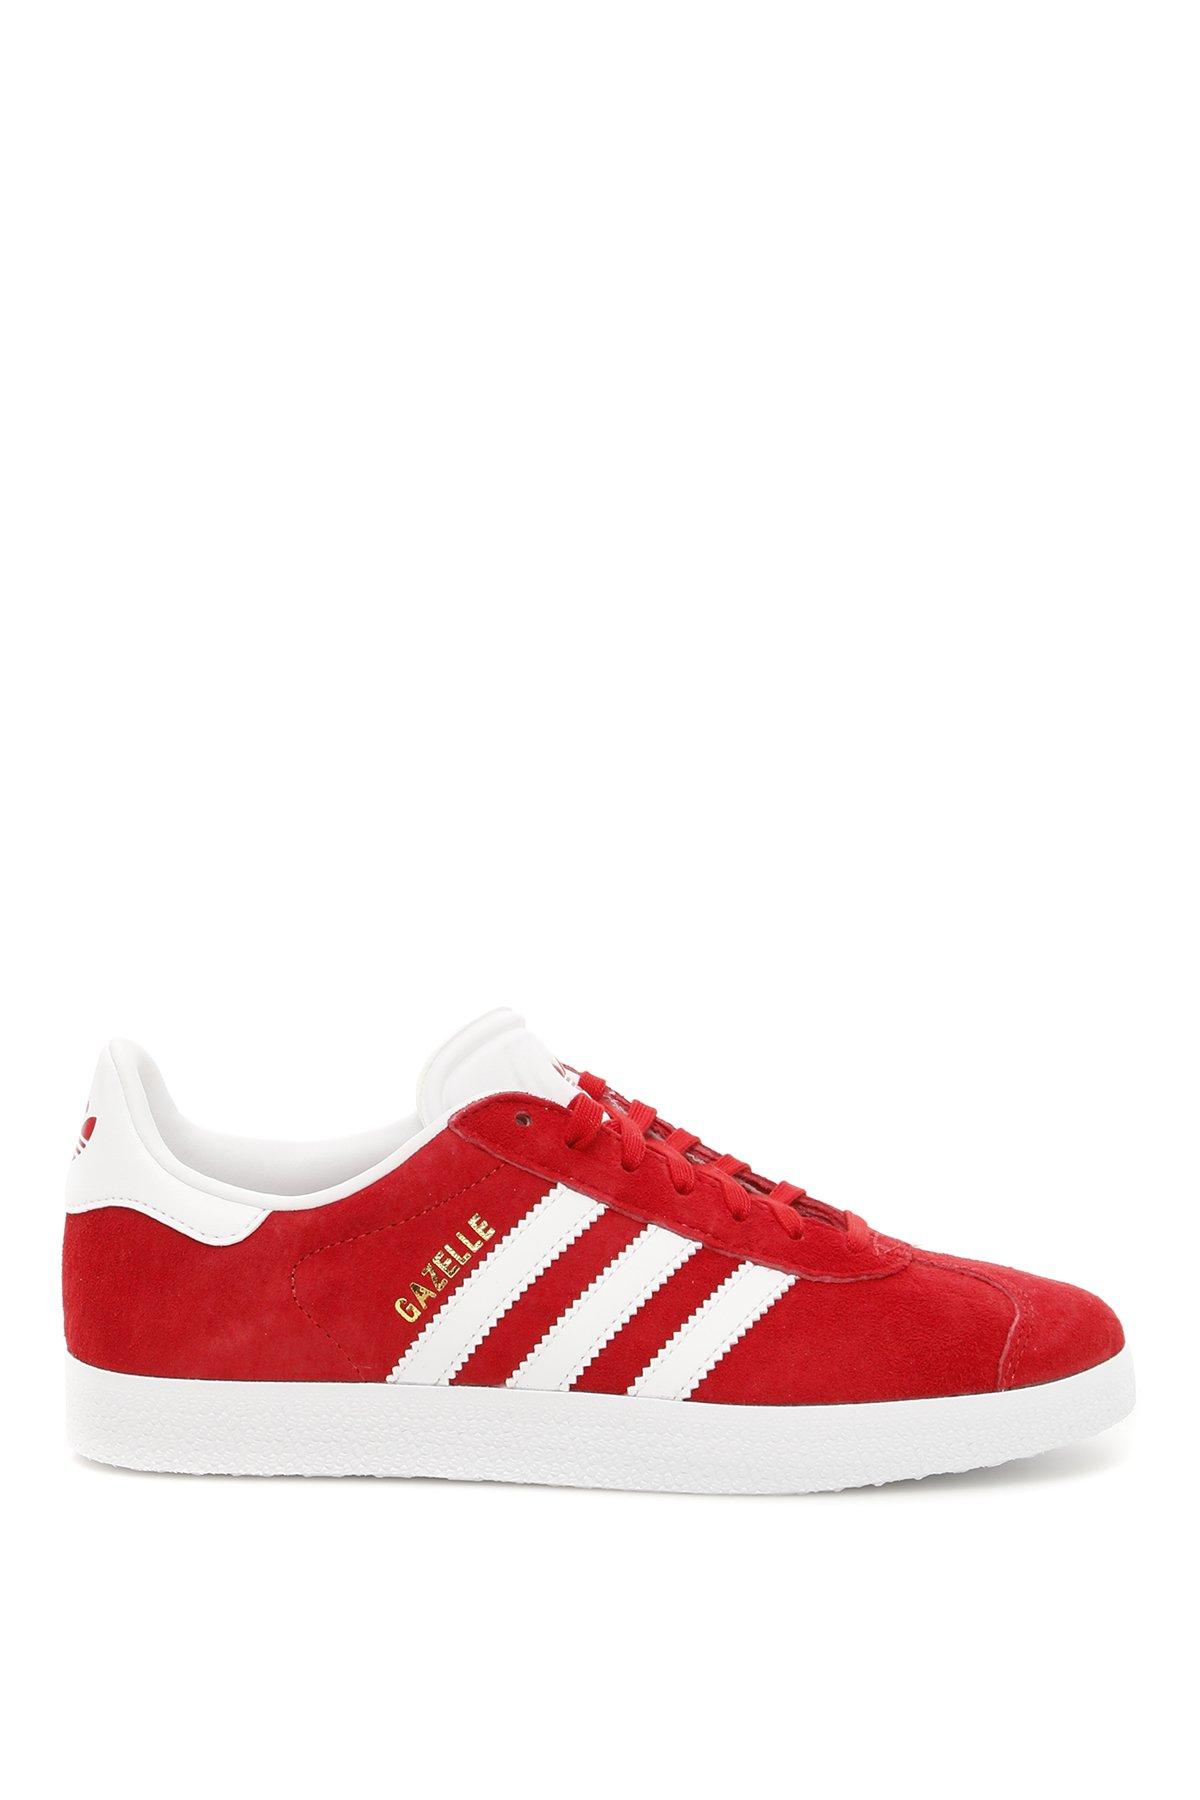 adidas Originals Leather Adidas Gazelle Sneakers in Red for Men - Lyst